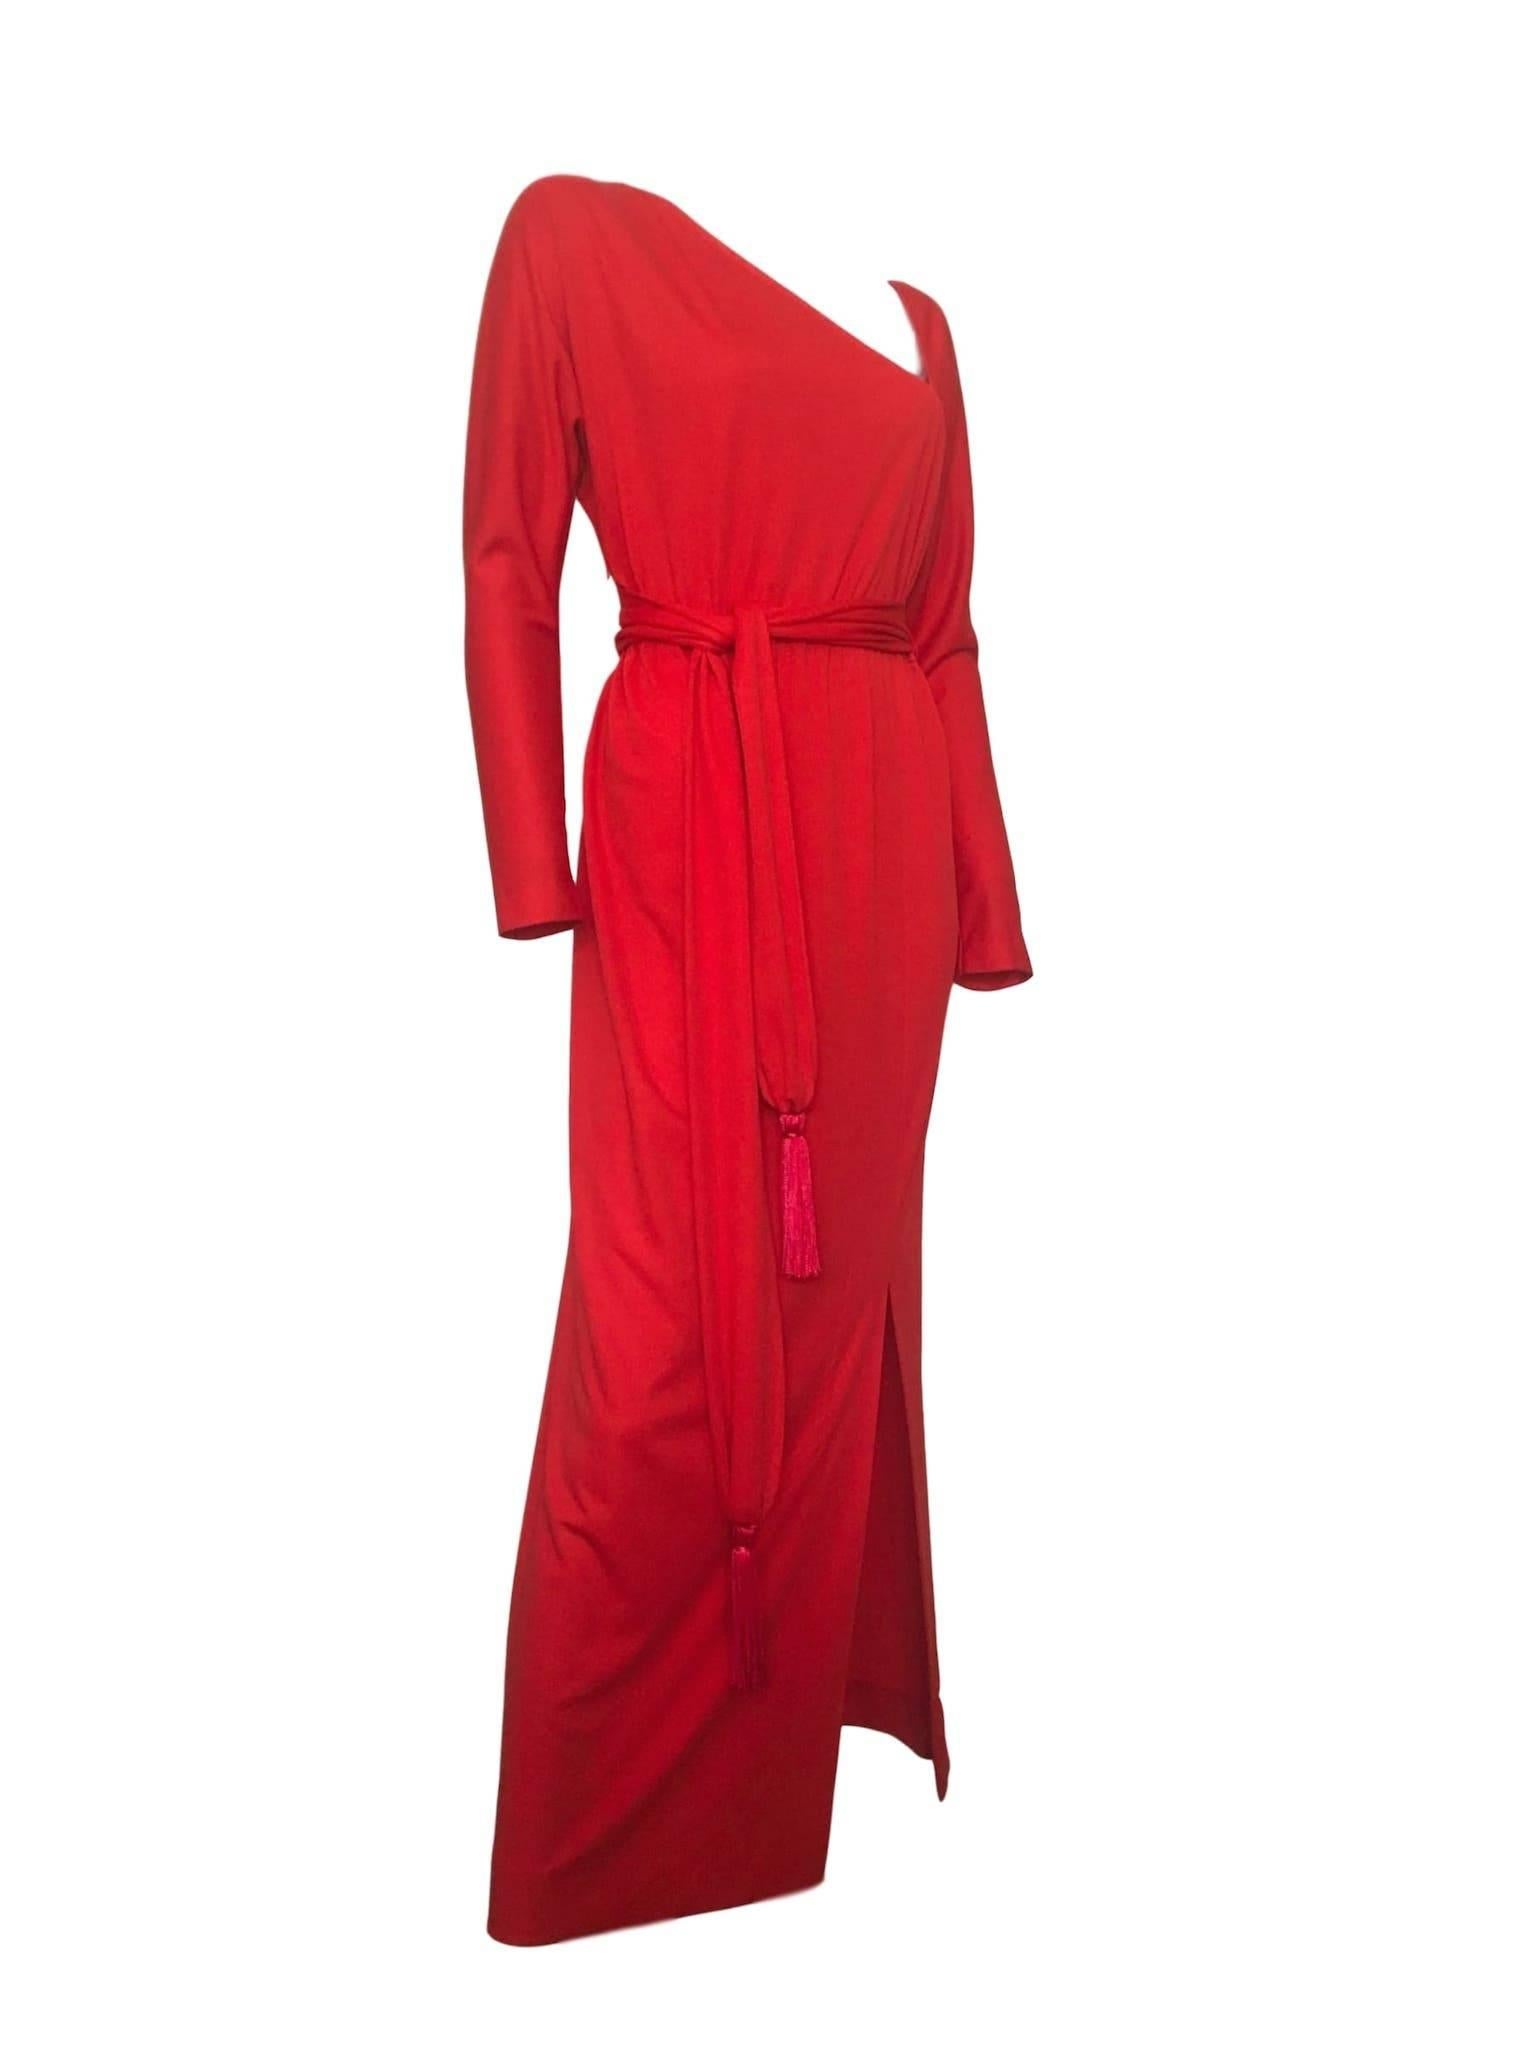 Victor Costa Red Hollywood Maxi Hostess Tassel Belt Dress In Excellent Condition For Sale In Portsmouth, Hampshire